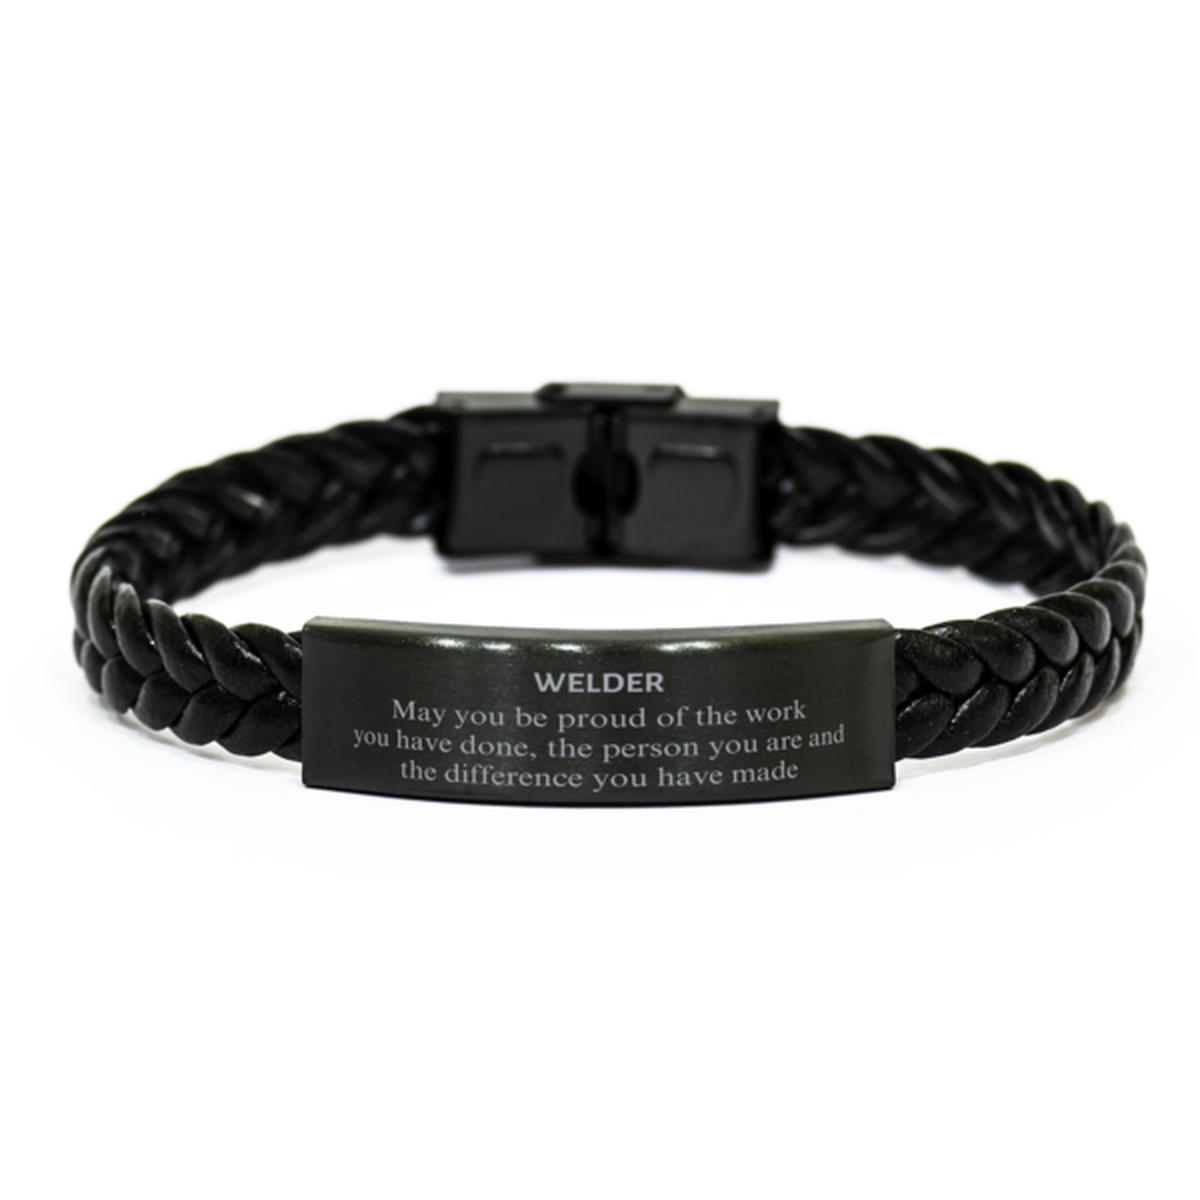 Welder May you be proud of the work you have done, Retirement Welder Braided Leather Bracelet for Colleague Appreciation Gifts Amazing for Welder